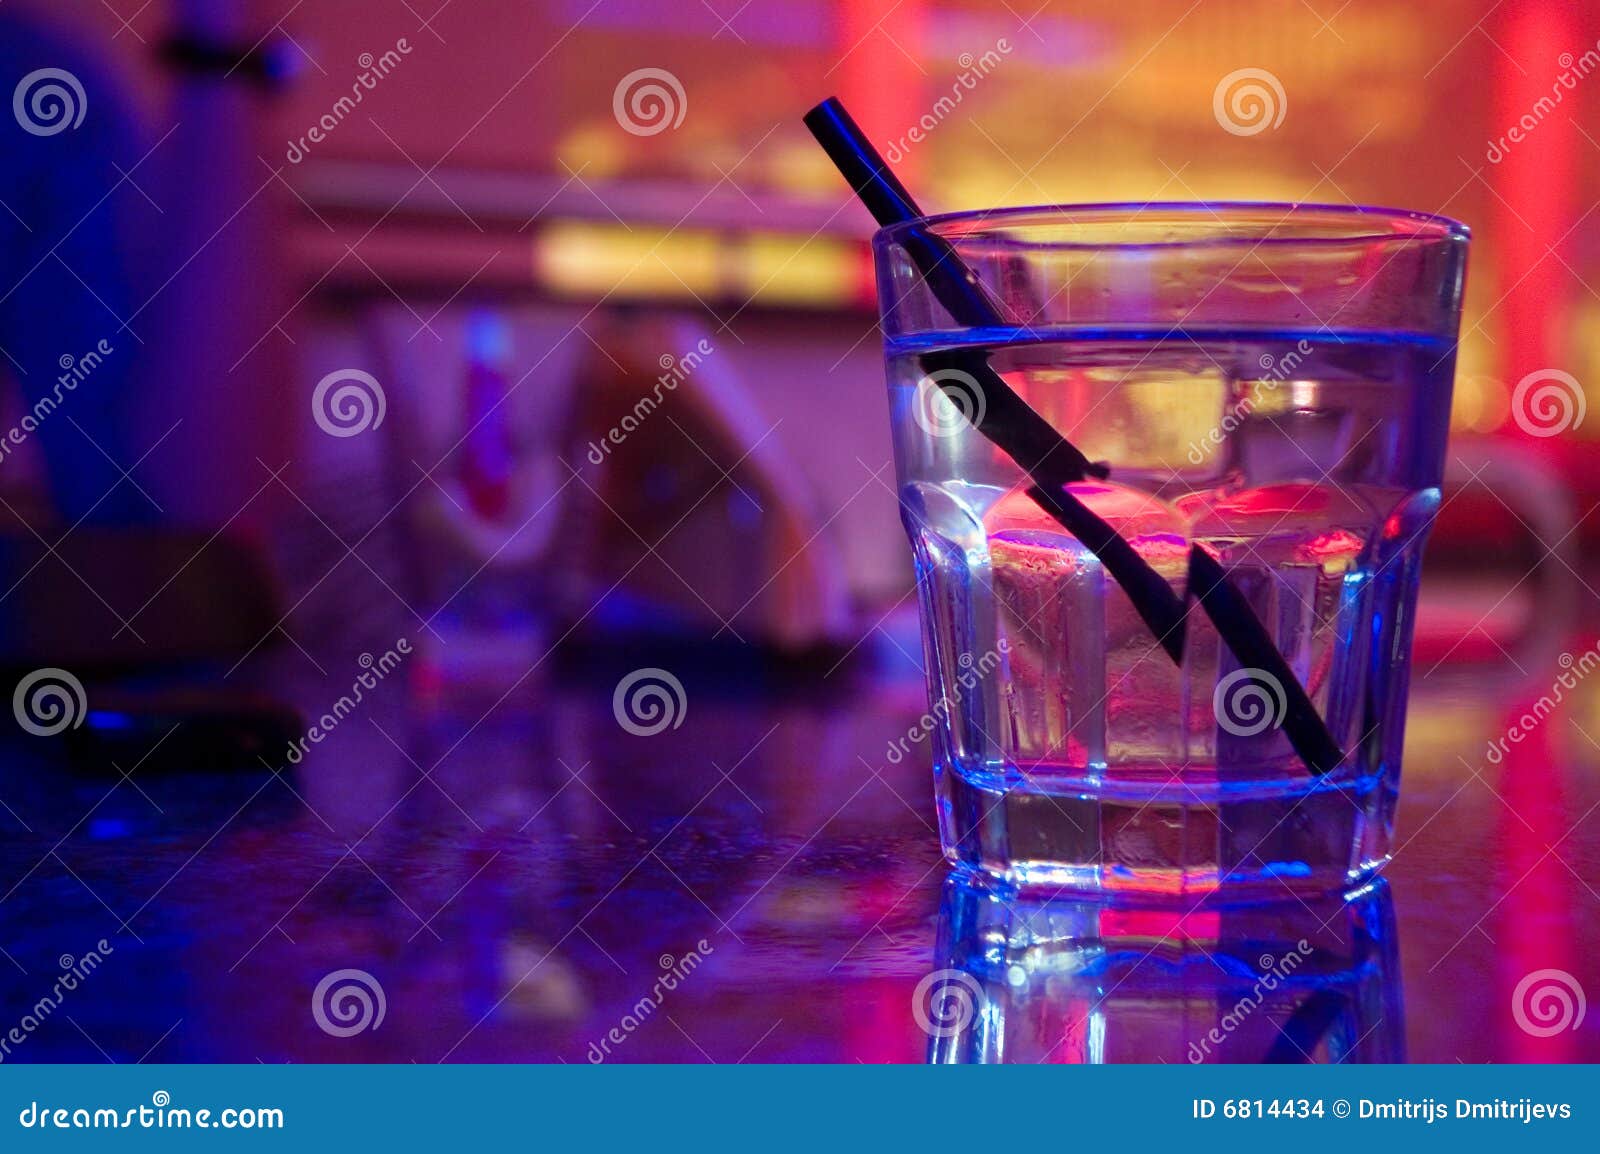 glass of alcohol drink in the night club